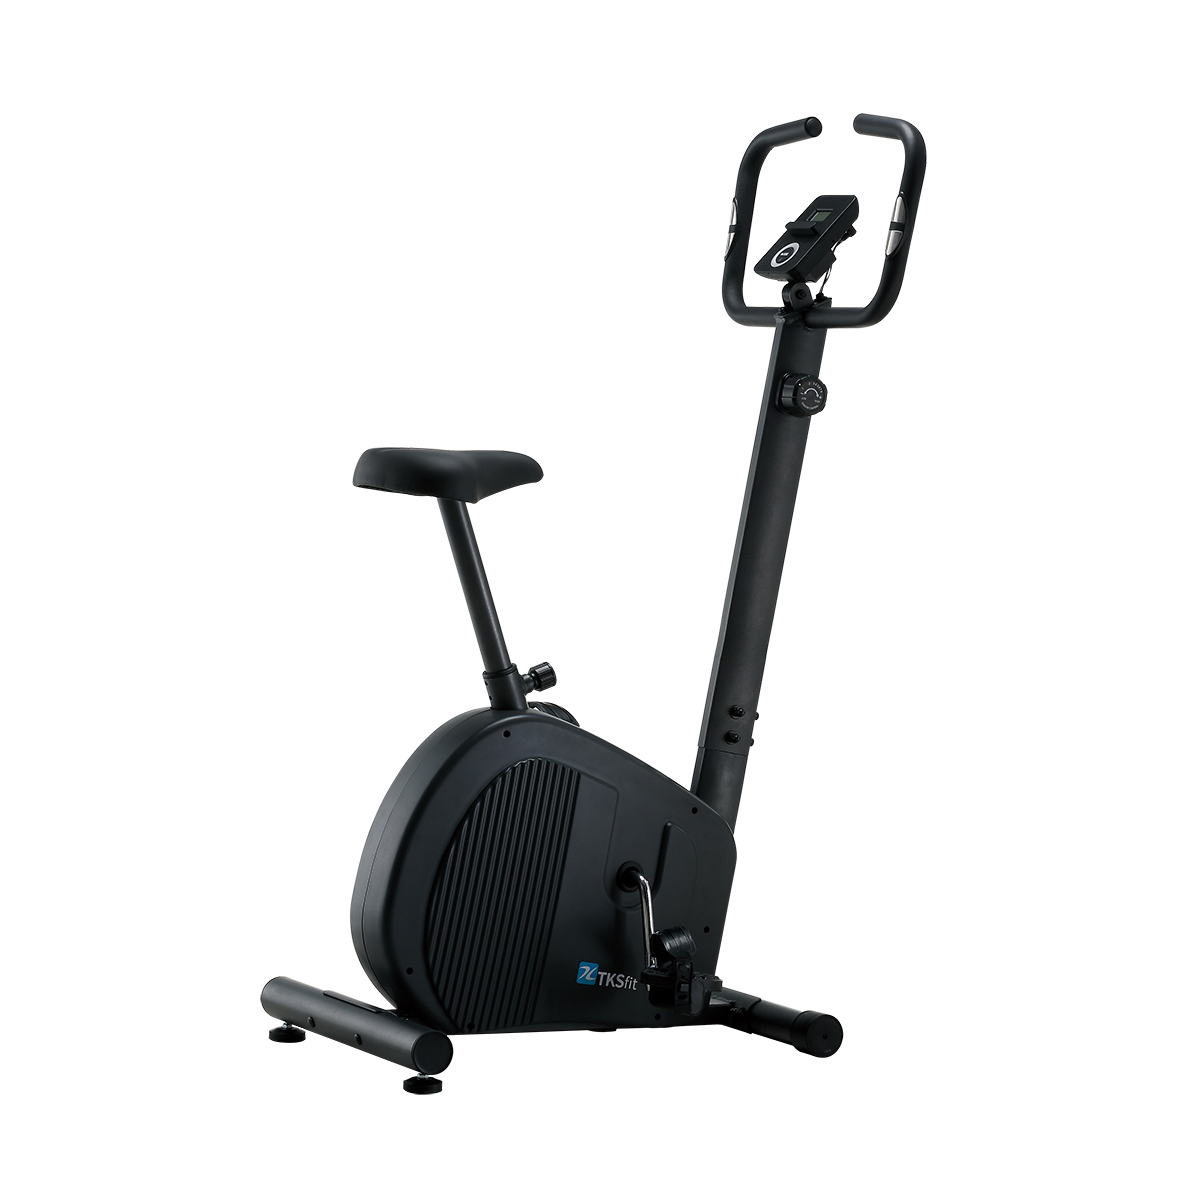 TAIKEE Home Use Magnetic Upright Bike Model No.: TK-B80030 Featured Image